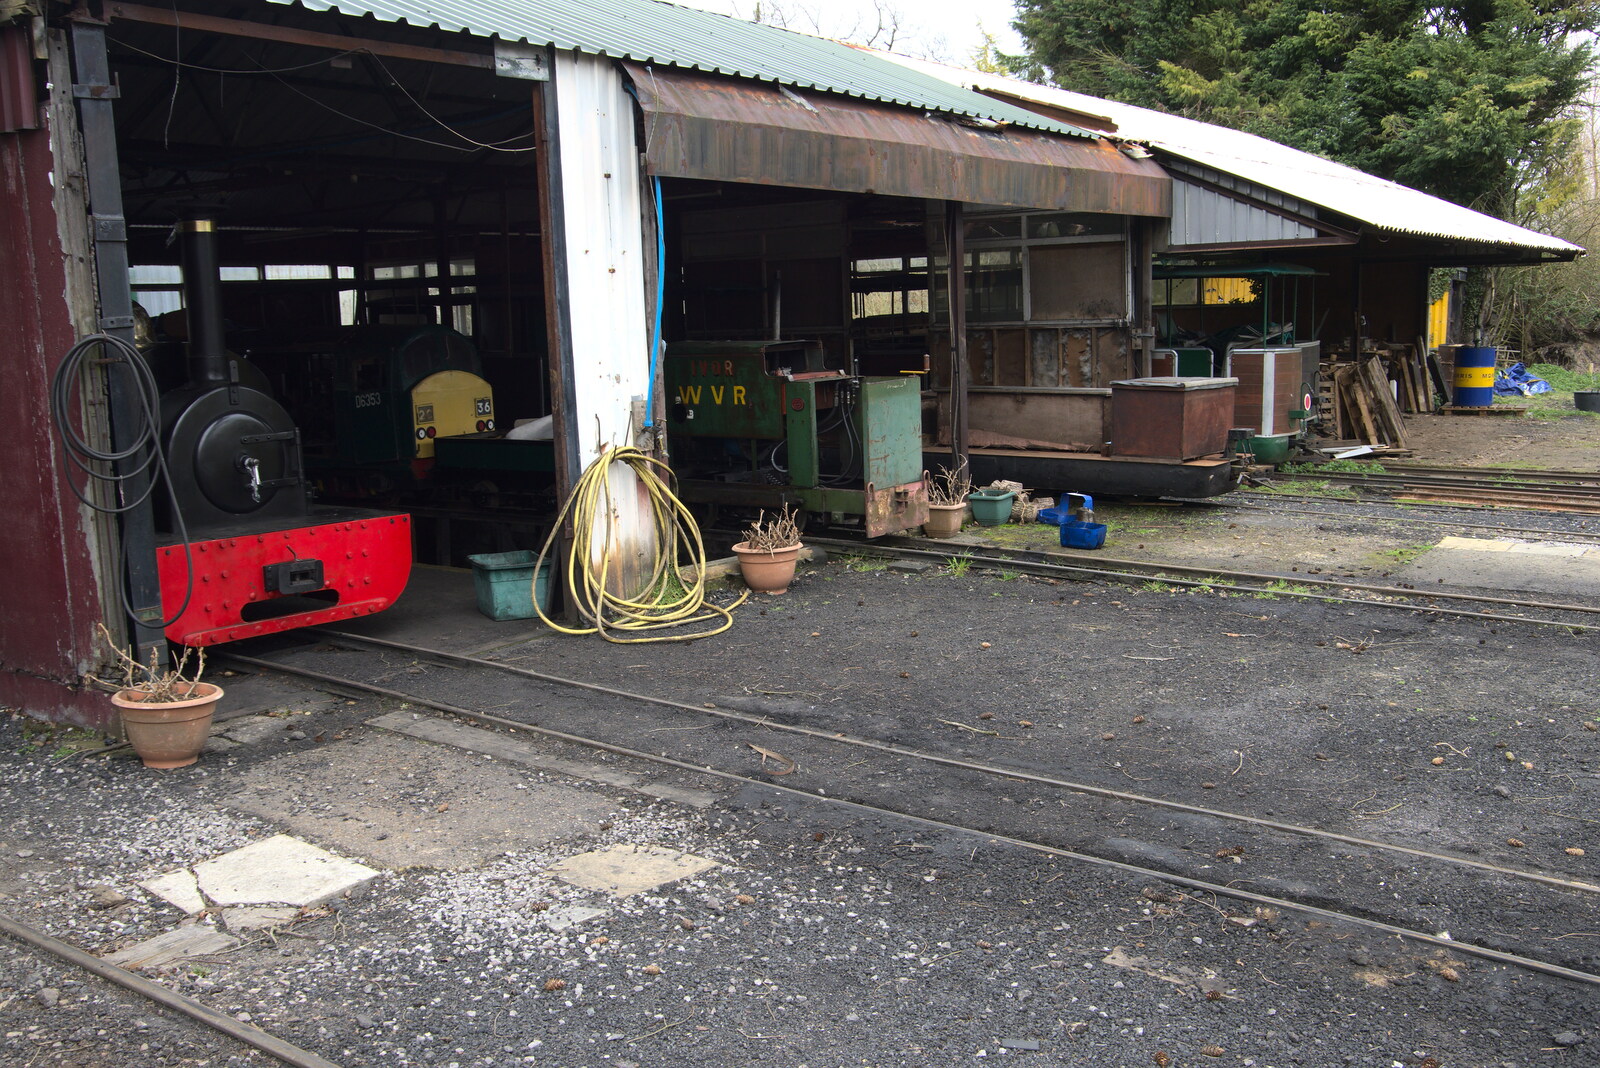 The engine sheds from A Return to Bressingham Steam and Gardens, Bressingham, Norfolk - 28th March 2021